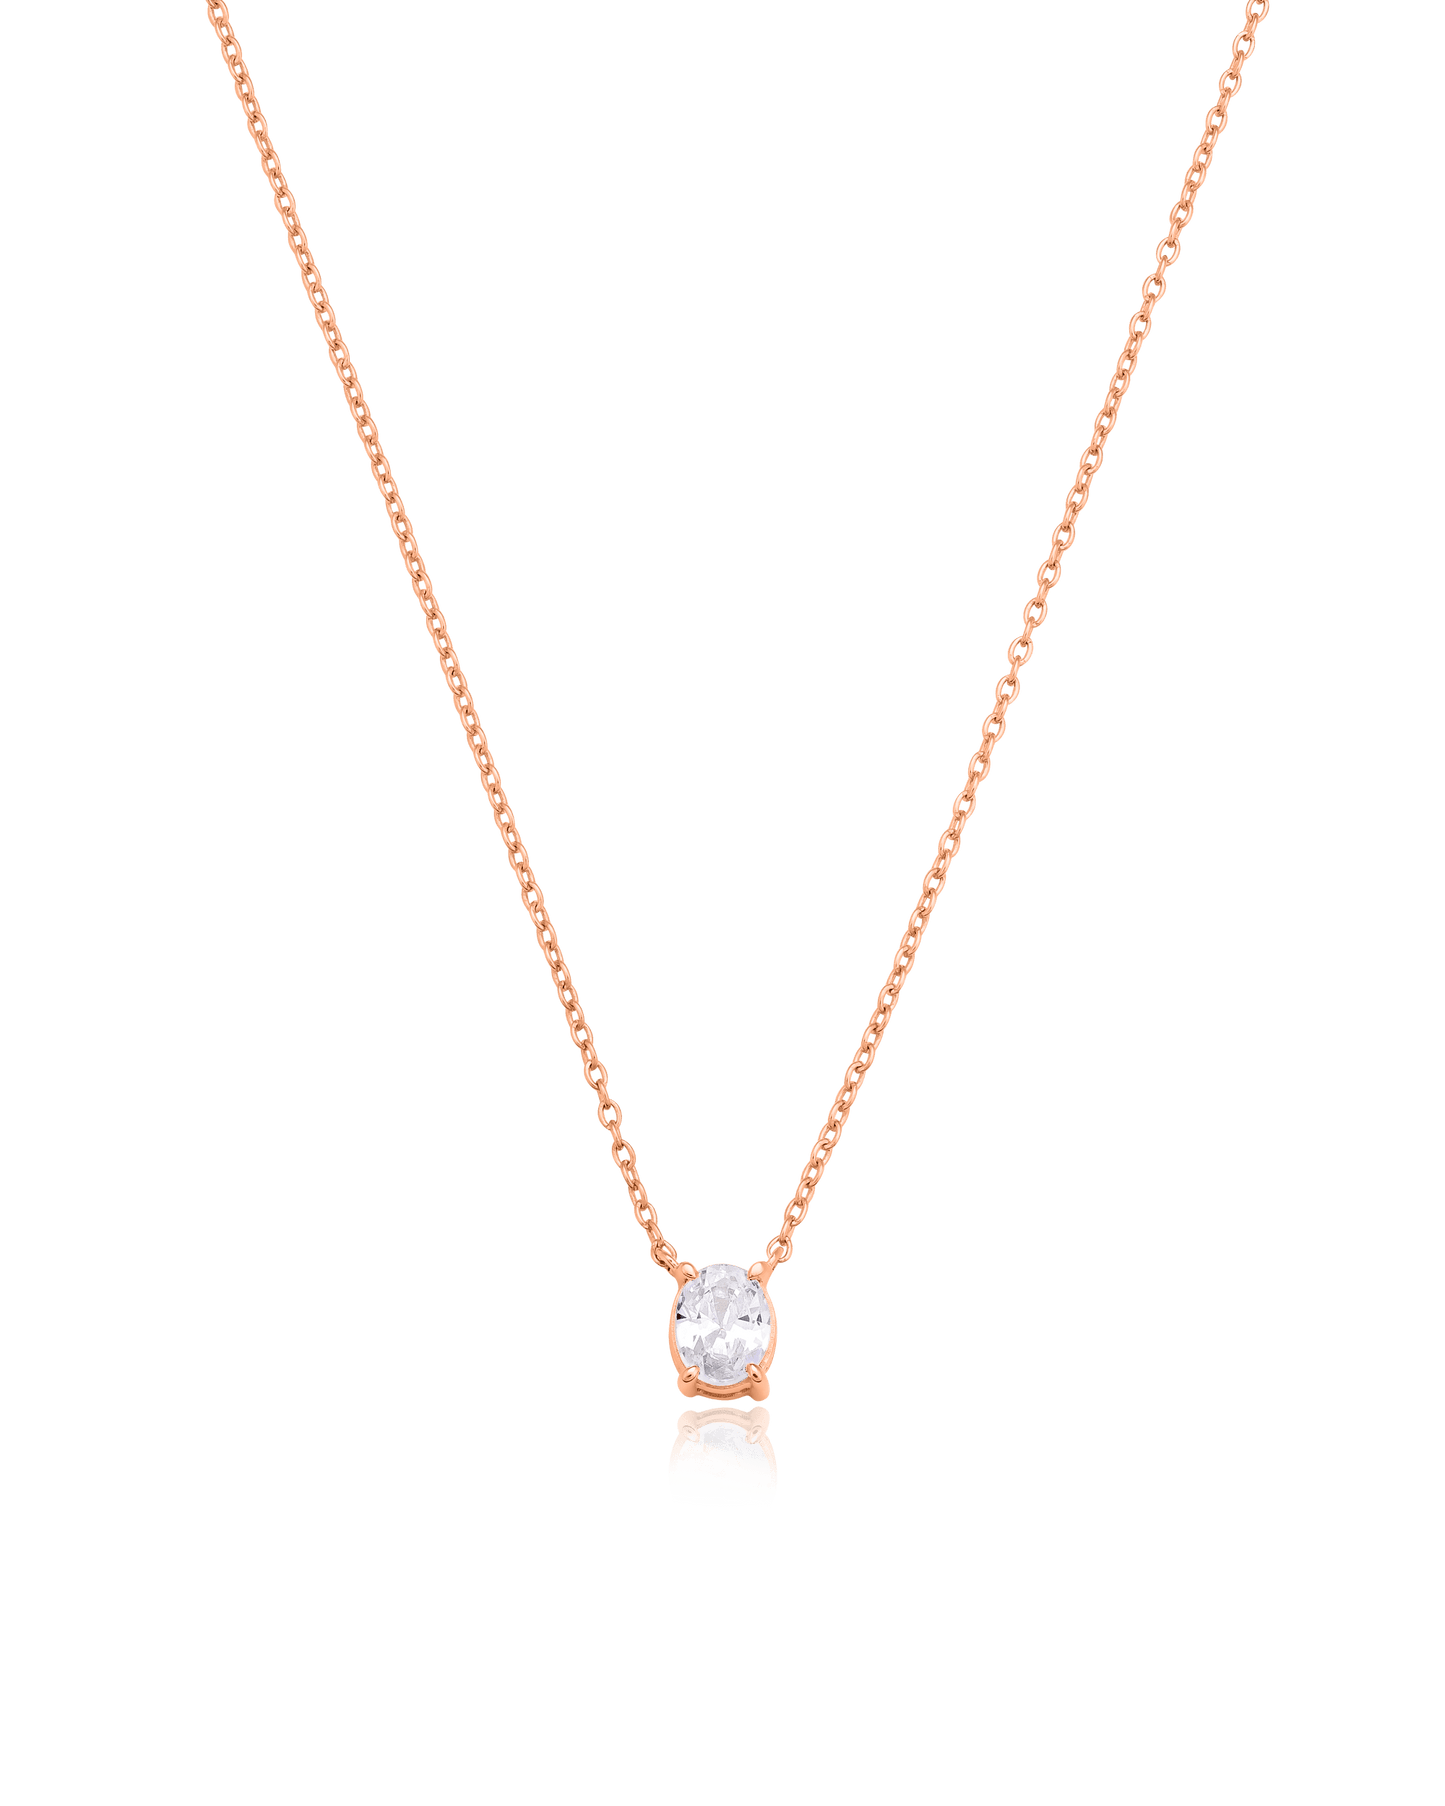 Oval Solitaire Diamond Necklace - 14K Yellow Gold Necklaces magal-dev 